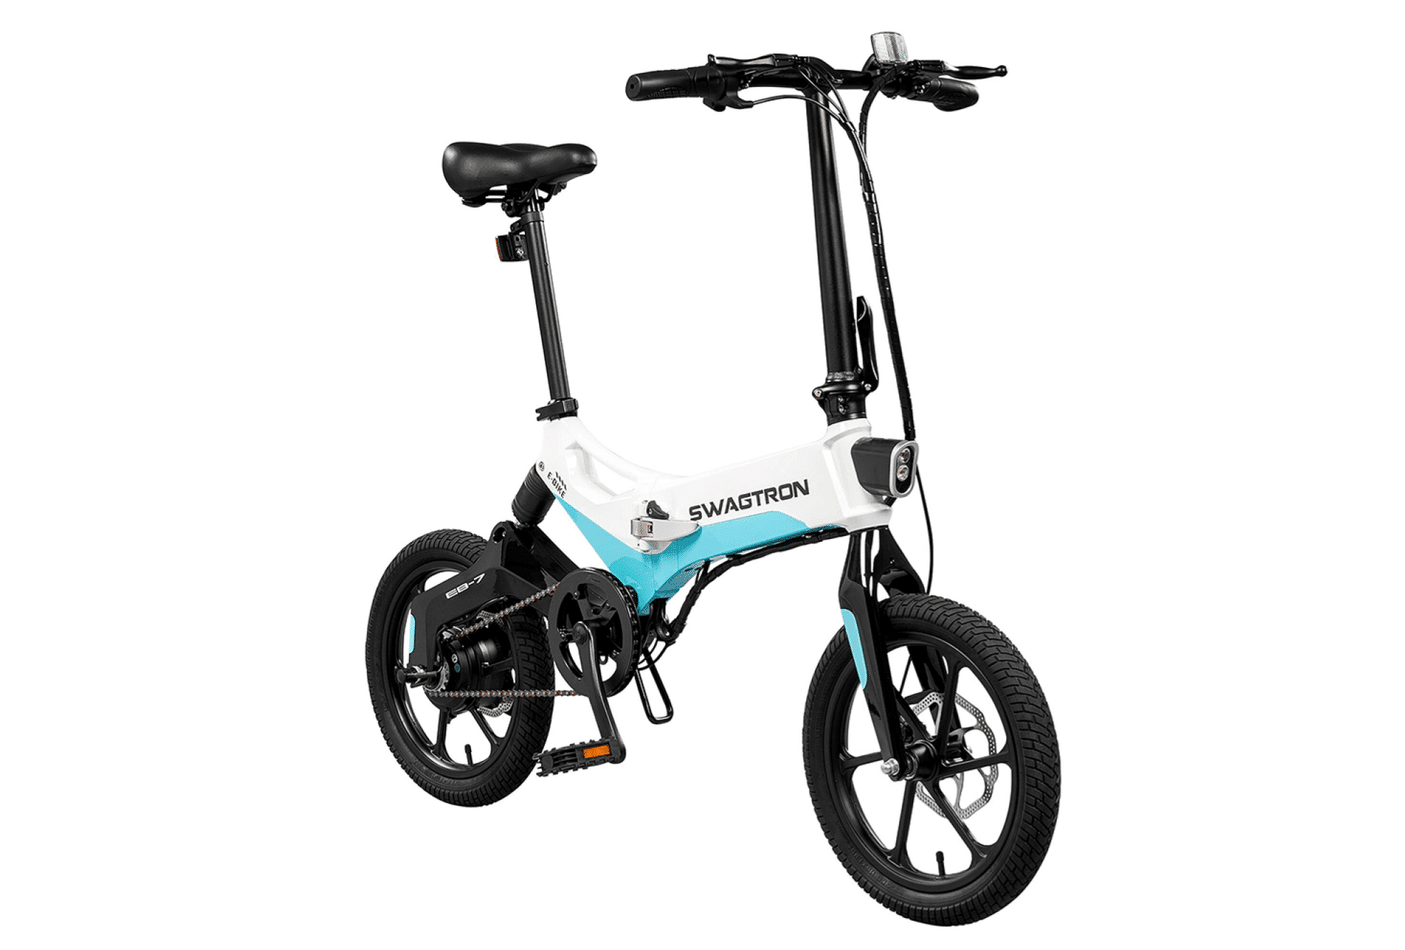 swagcycle review